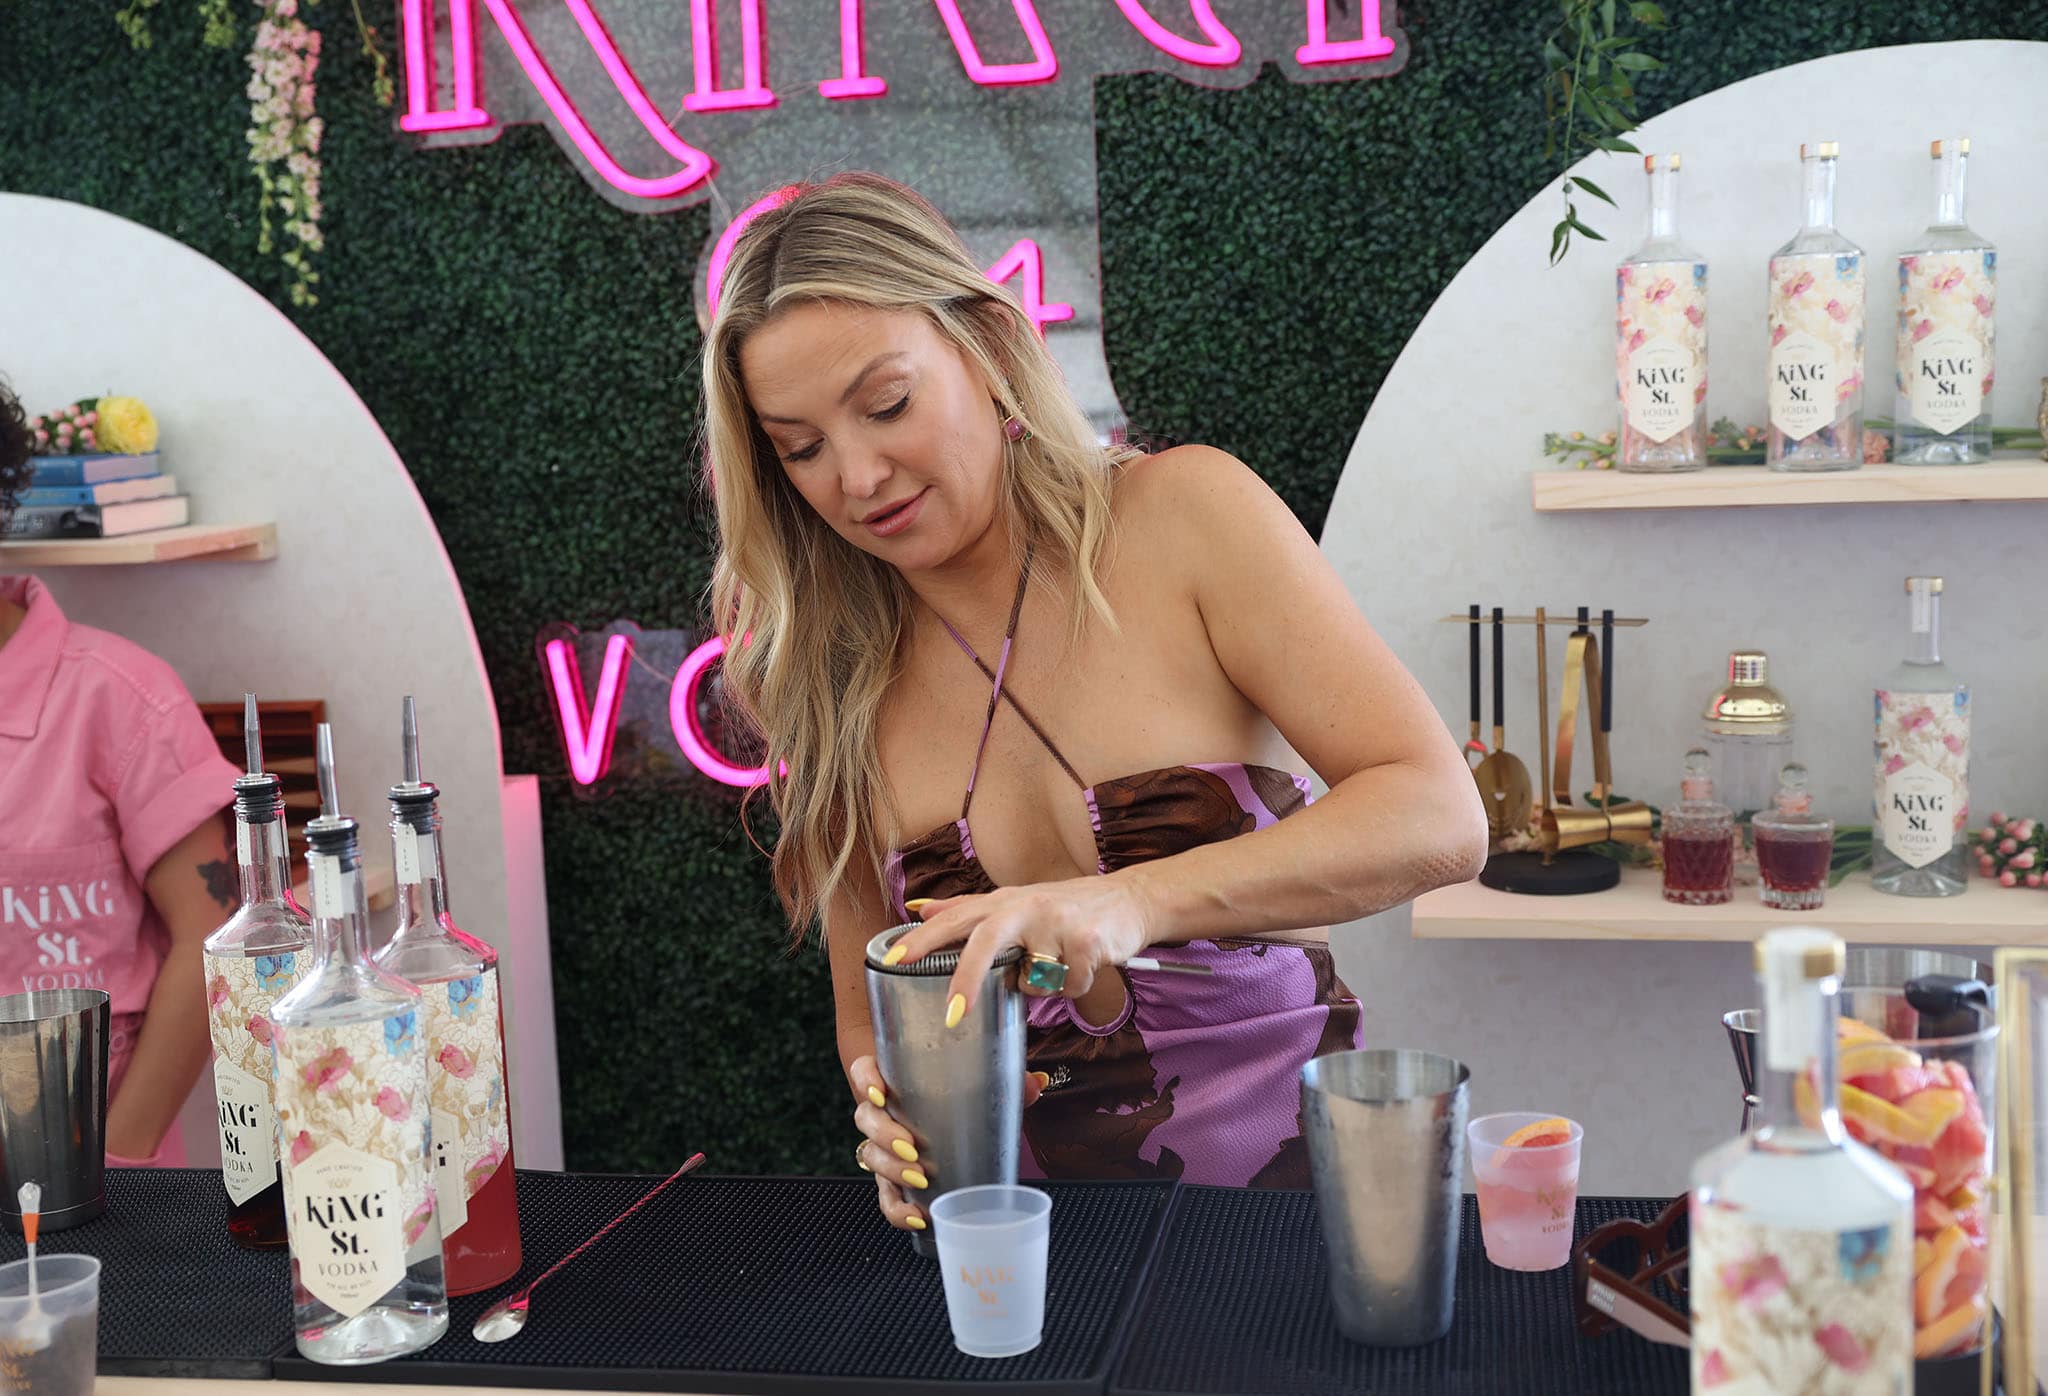 Kate Hudson attends the Food Network South Beach Wine and Food Festival, representing her King St. vodka brand, in Miami on February 25, 2022